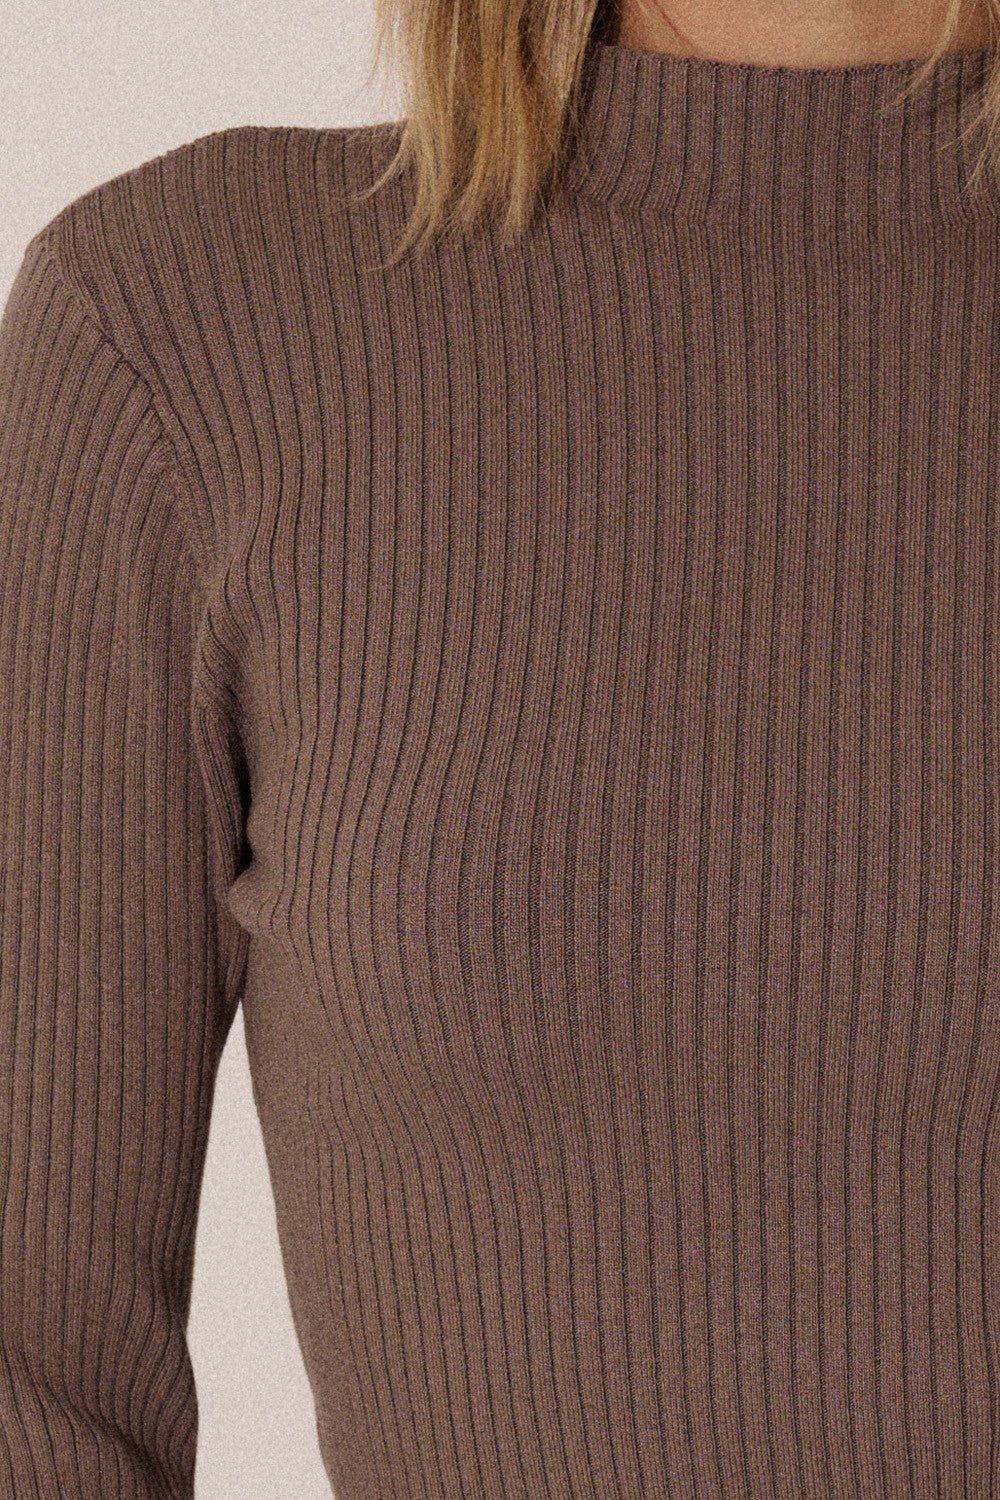 Feeling Thankful Ribbed Knit Sweater